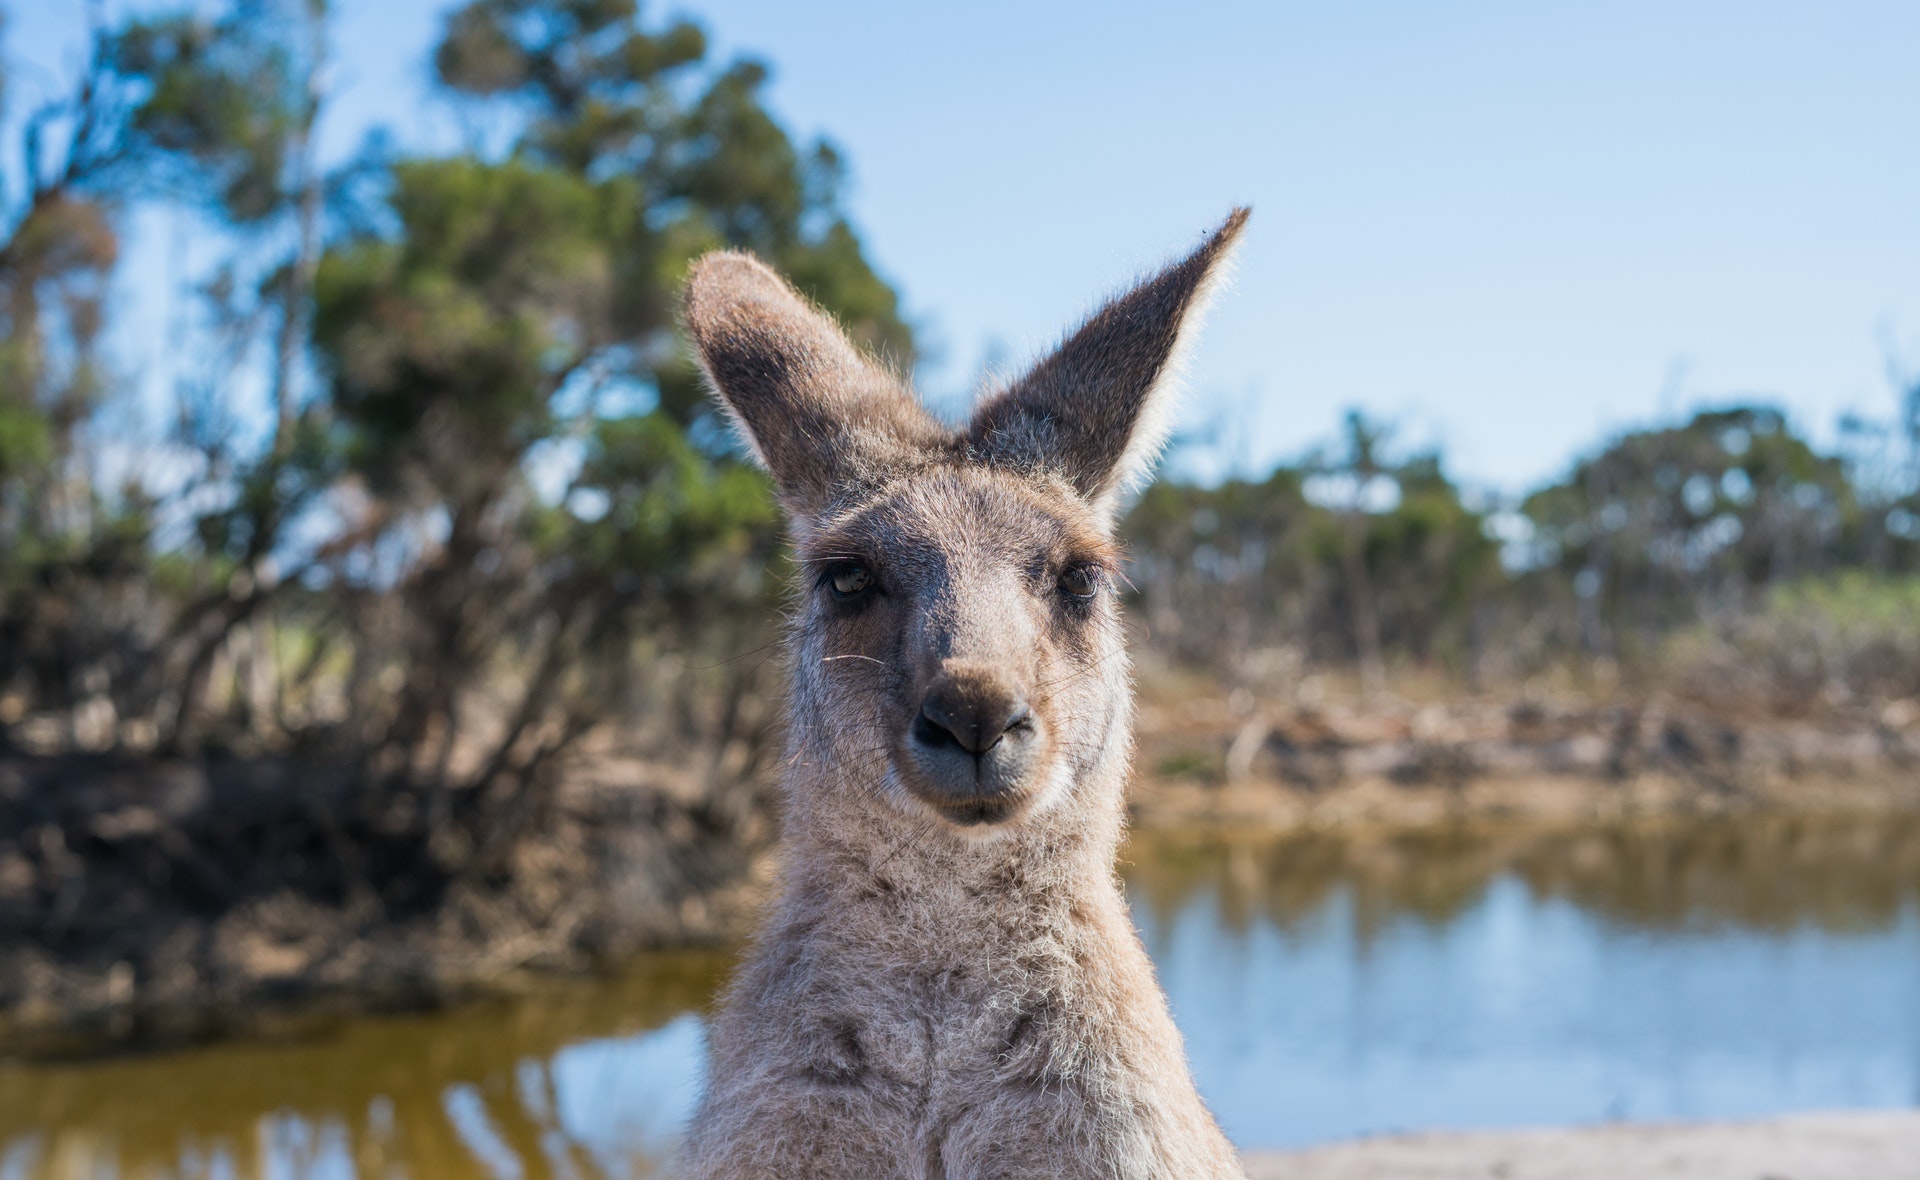 Where to see animals in the wild in Australia